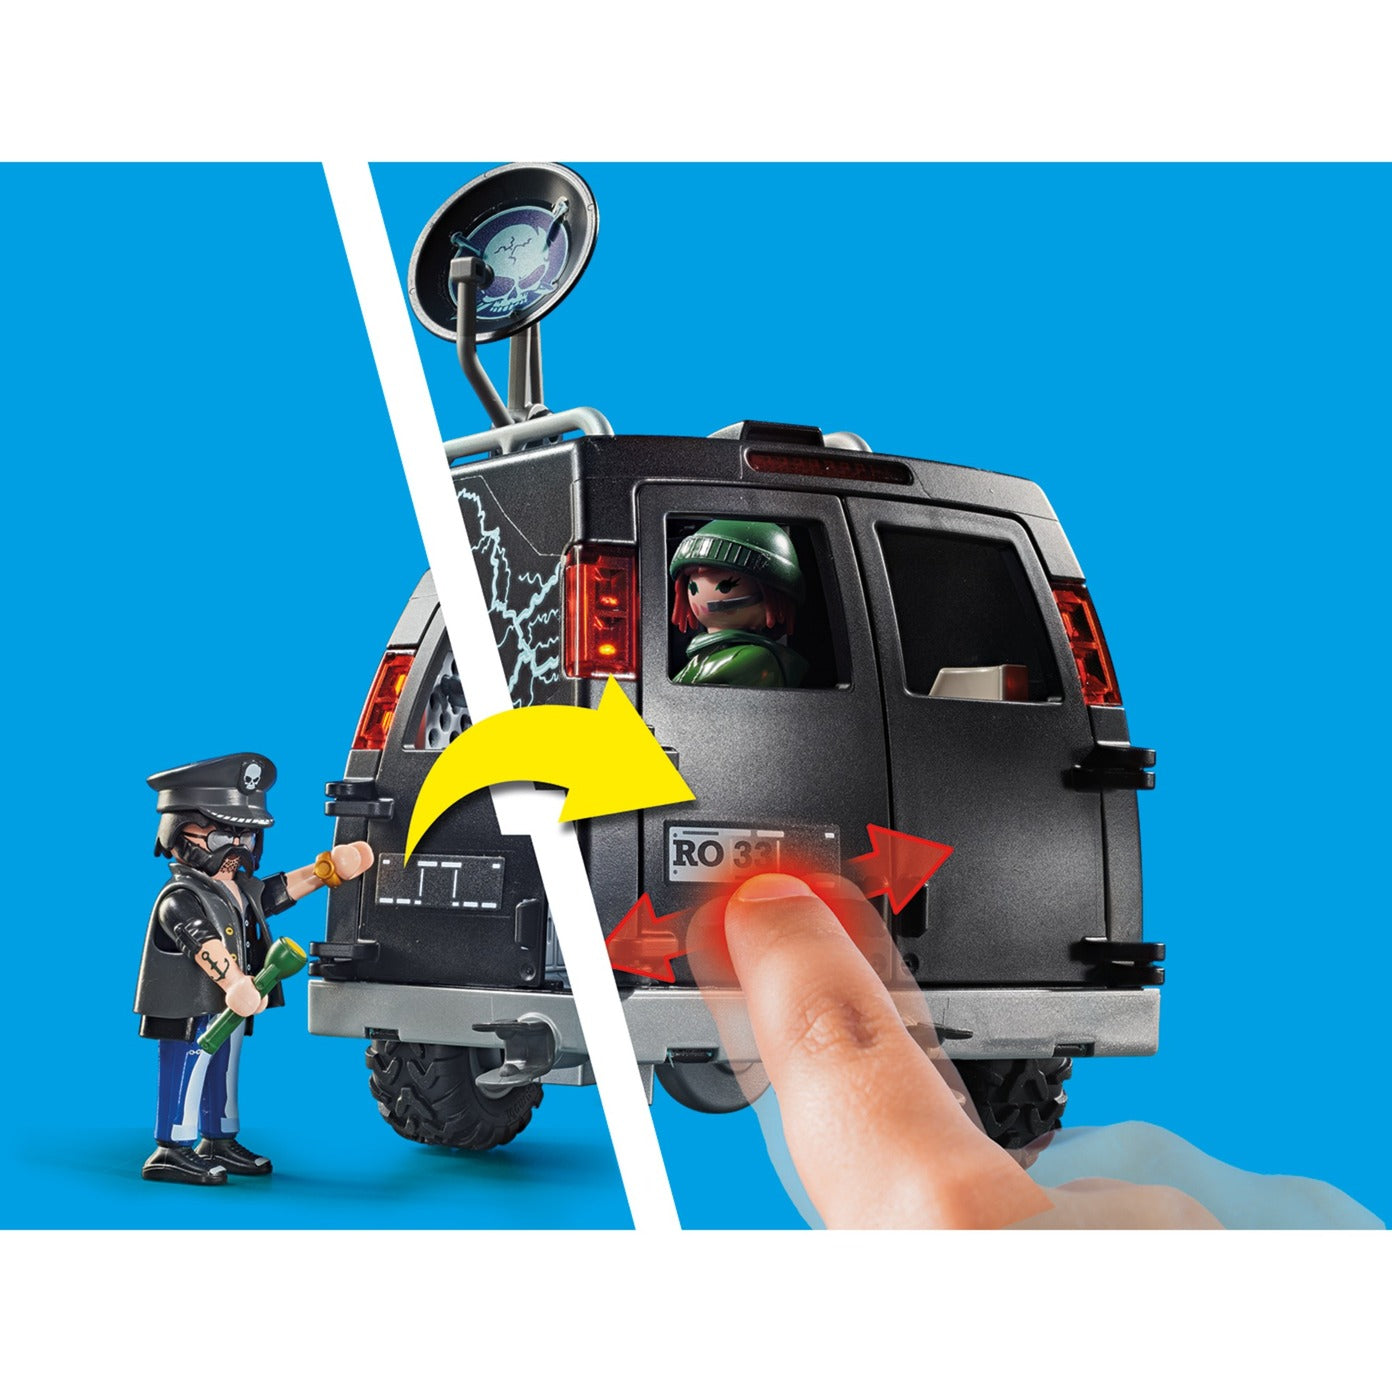 Playmobil City Action Police Elicopter: ricerca di